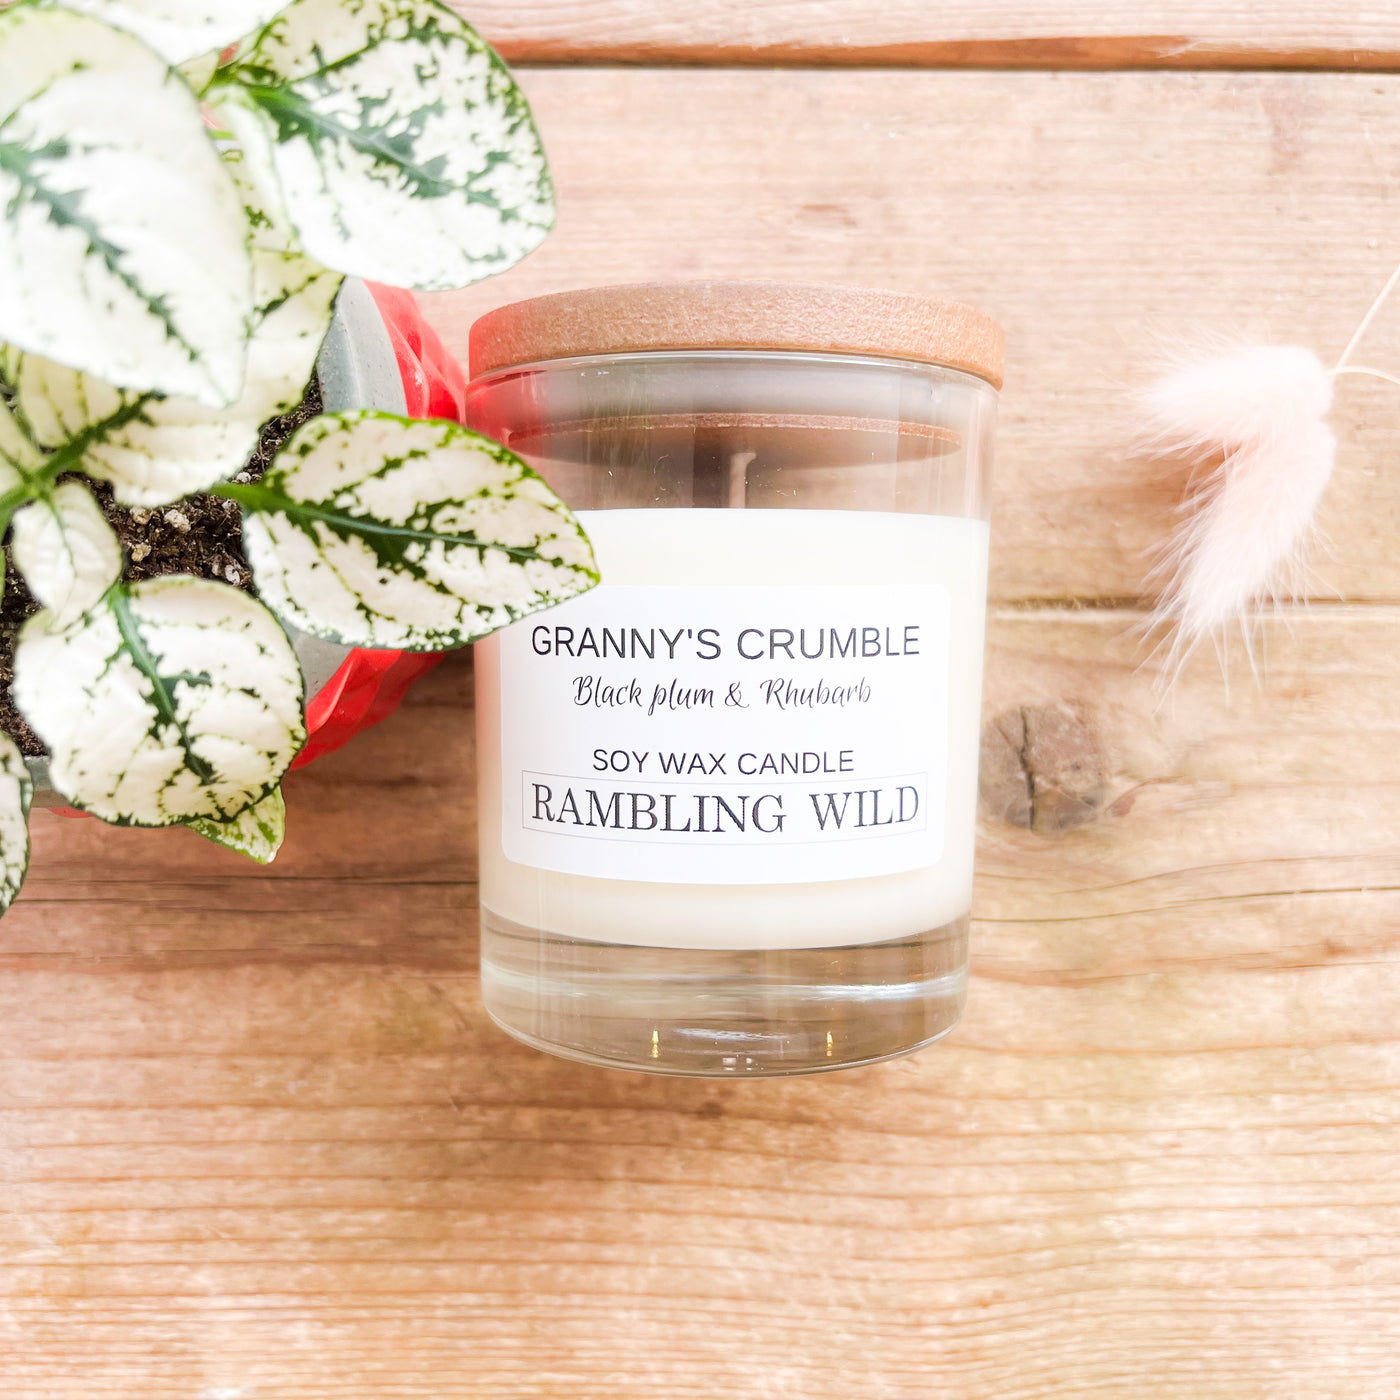 Rambling Wild Scented Candle - Granny’s crumble